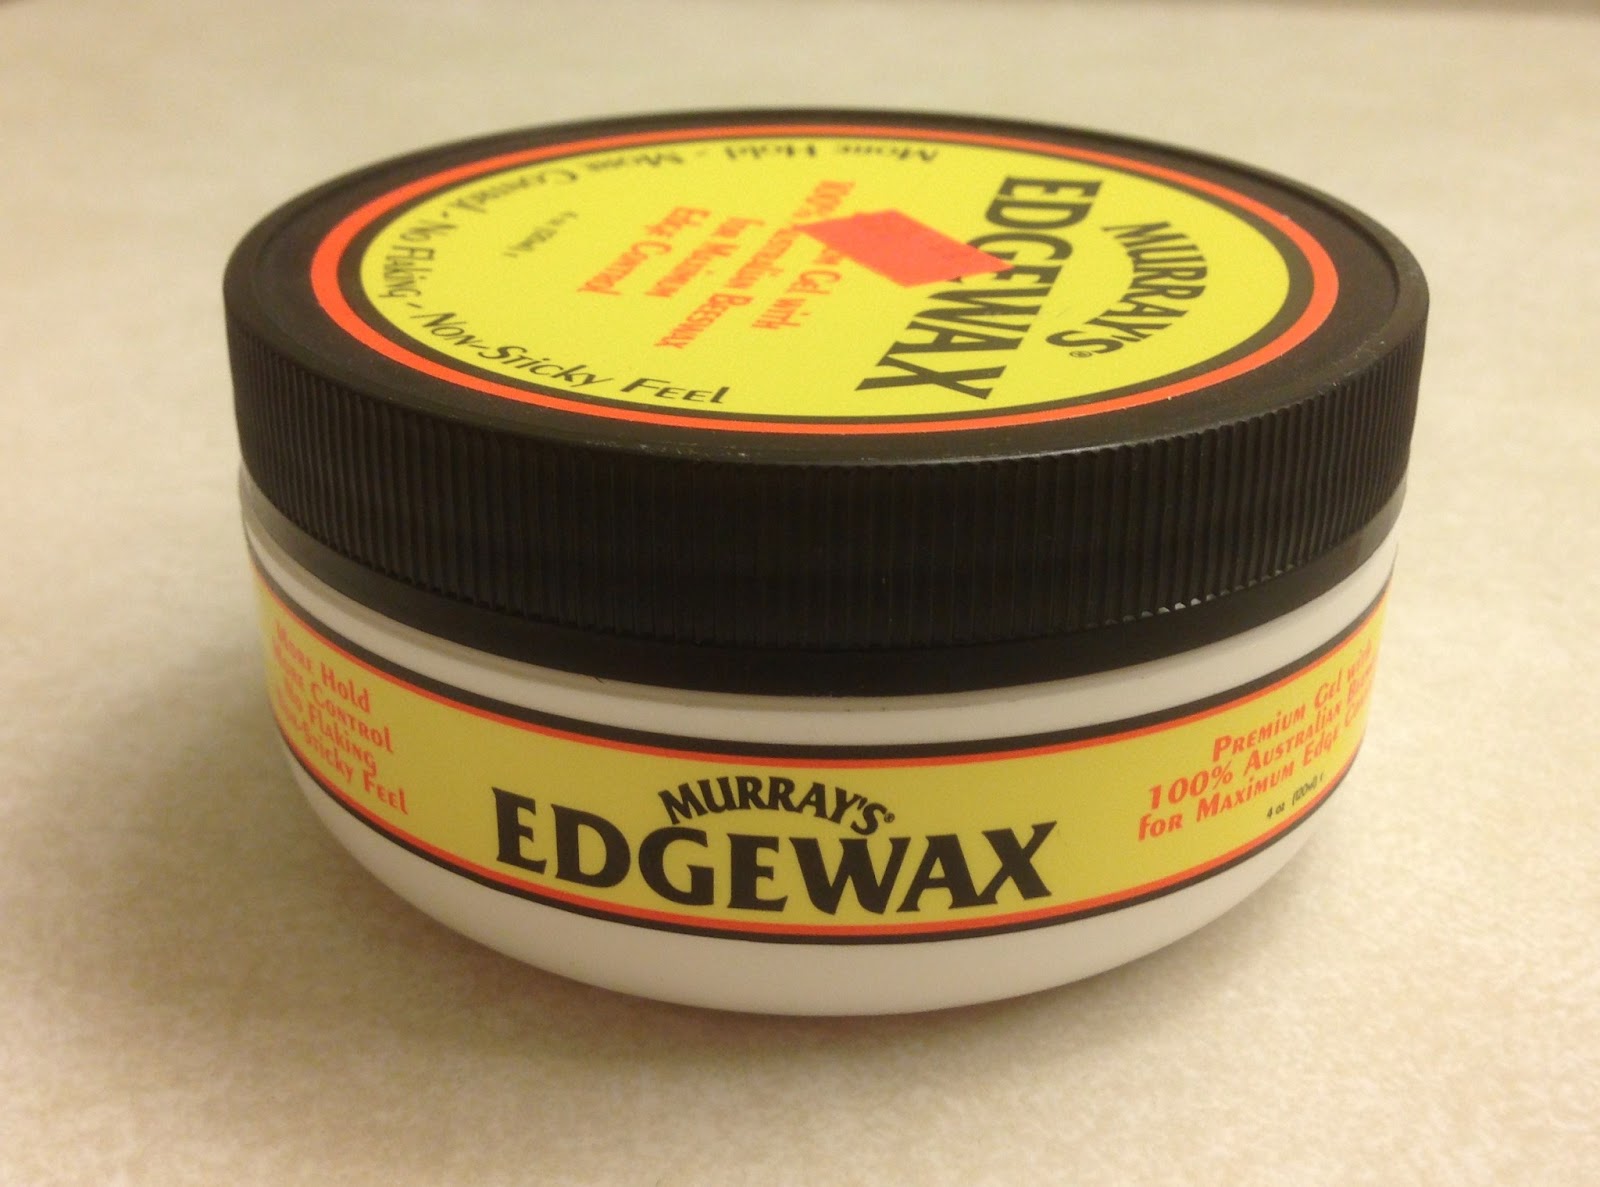 The Roosters Den: Murray's Edgewax Review